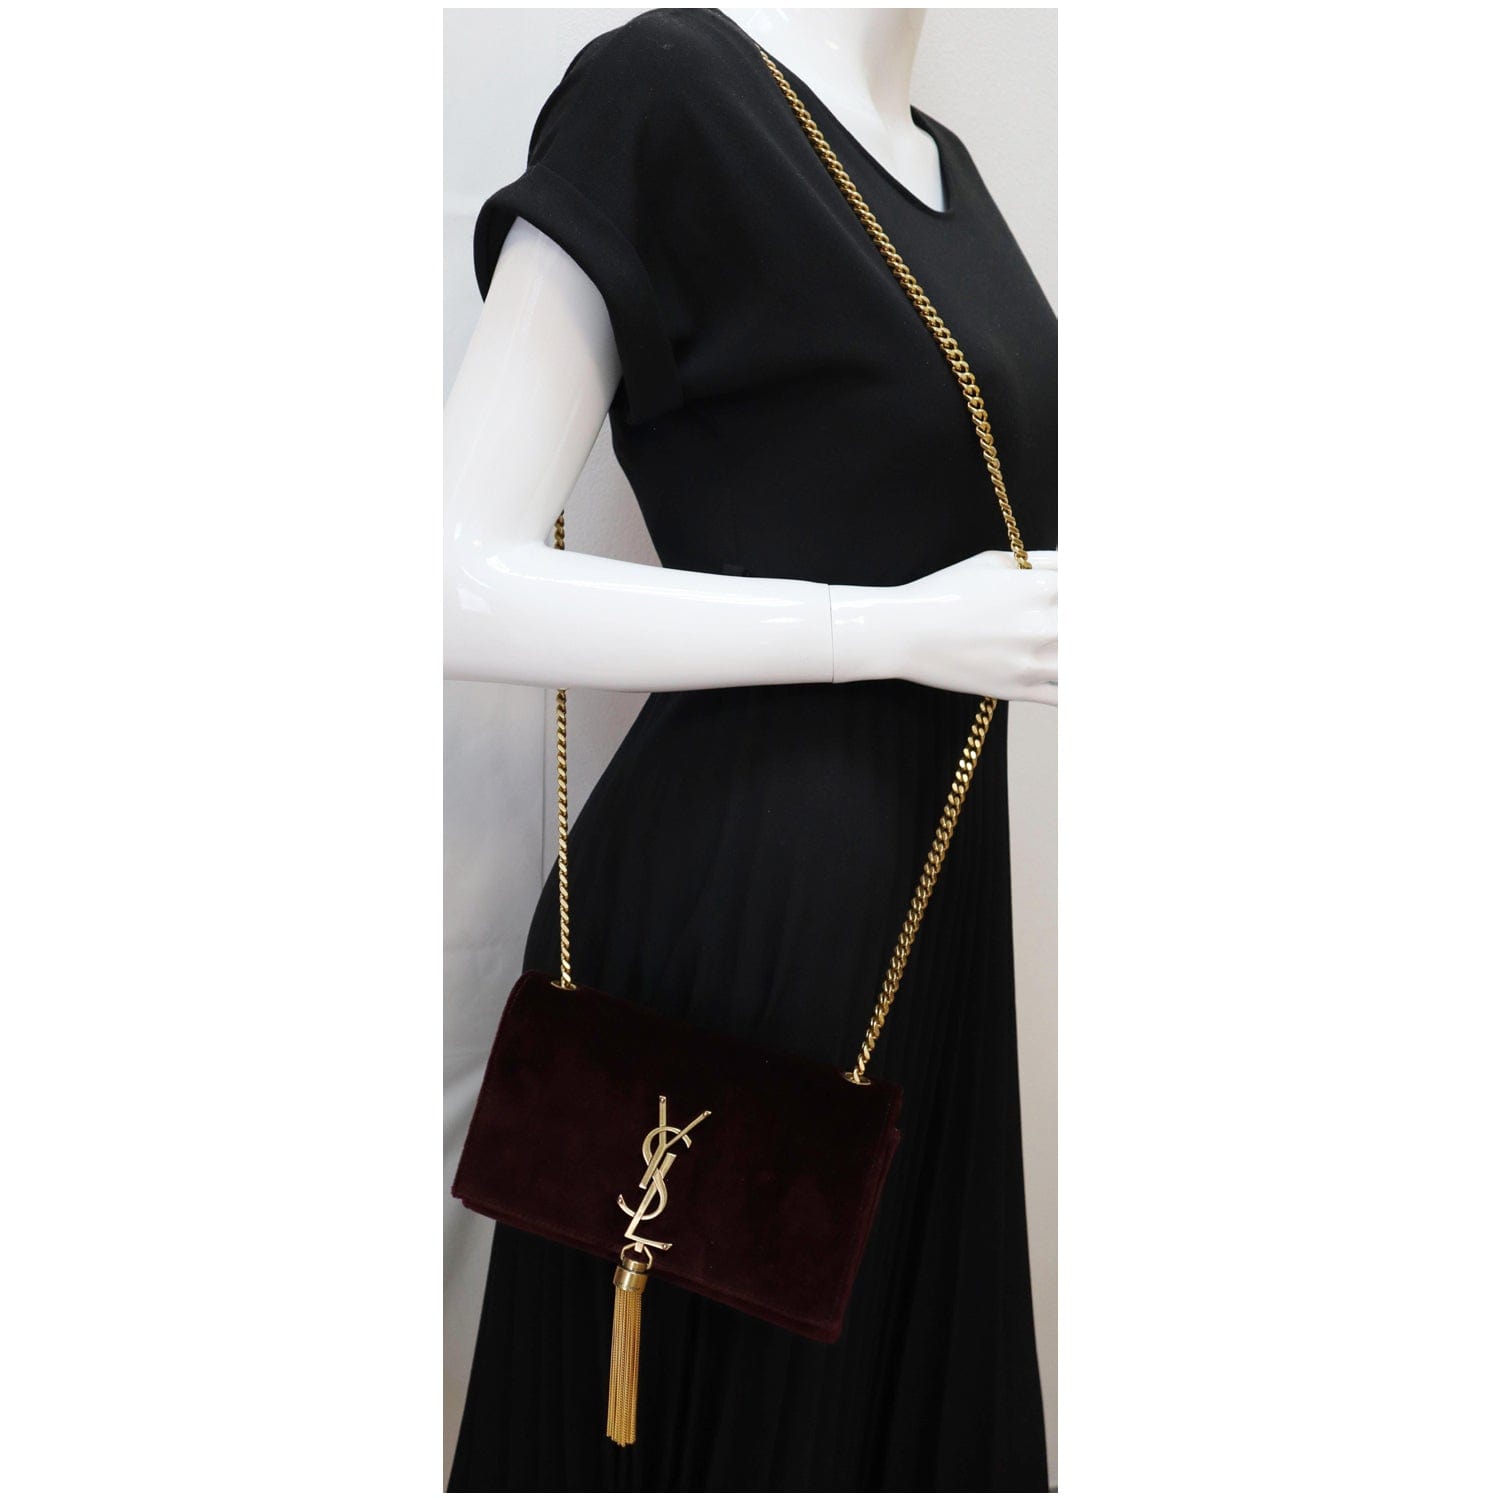 Yves Saint Laurent YSL KATE MEDIUM WITH TASSEL IN RED SMOOTH